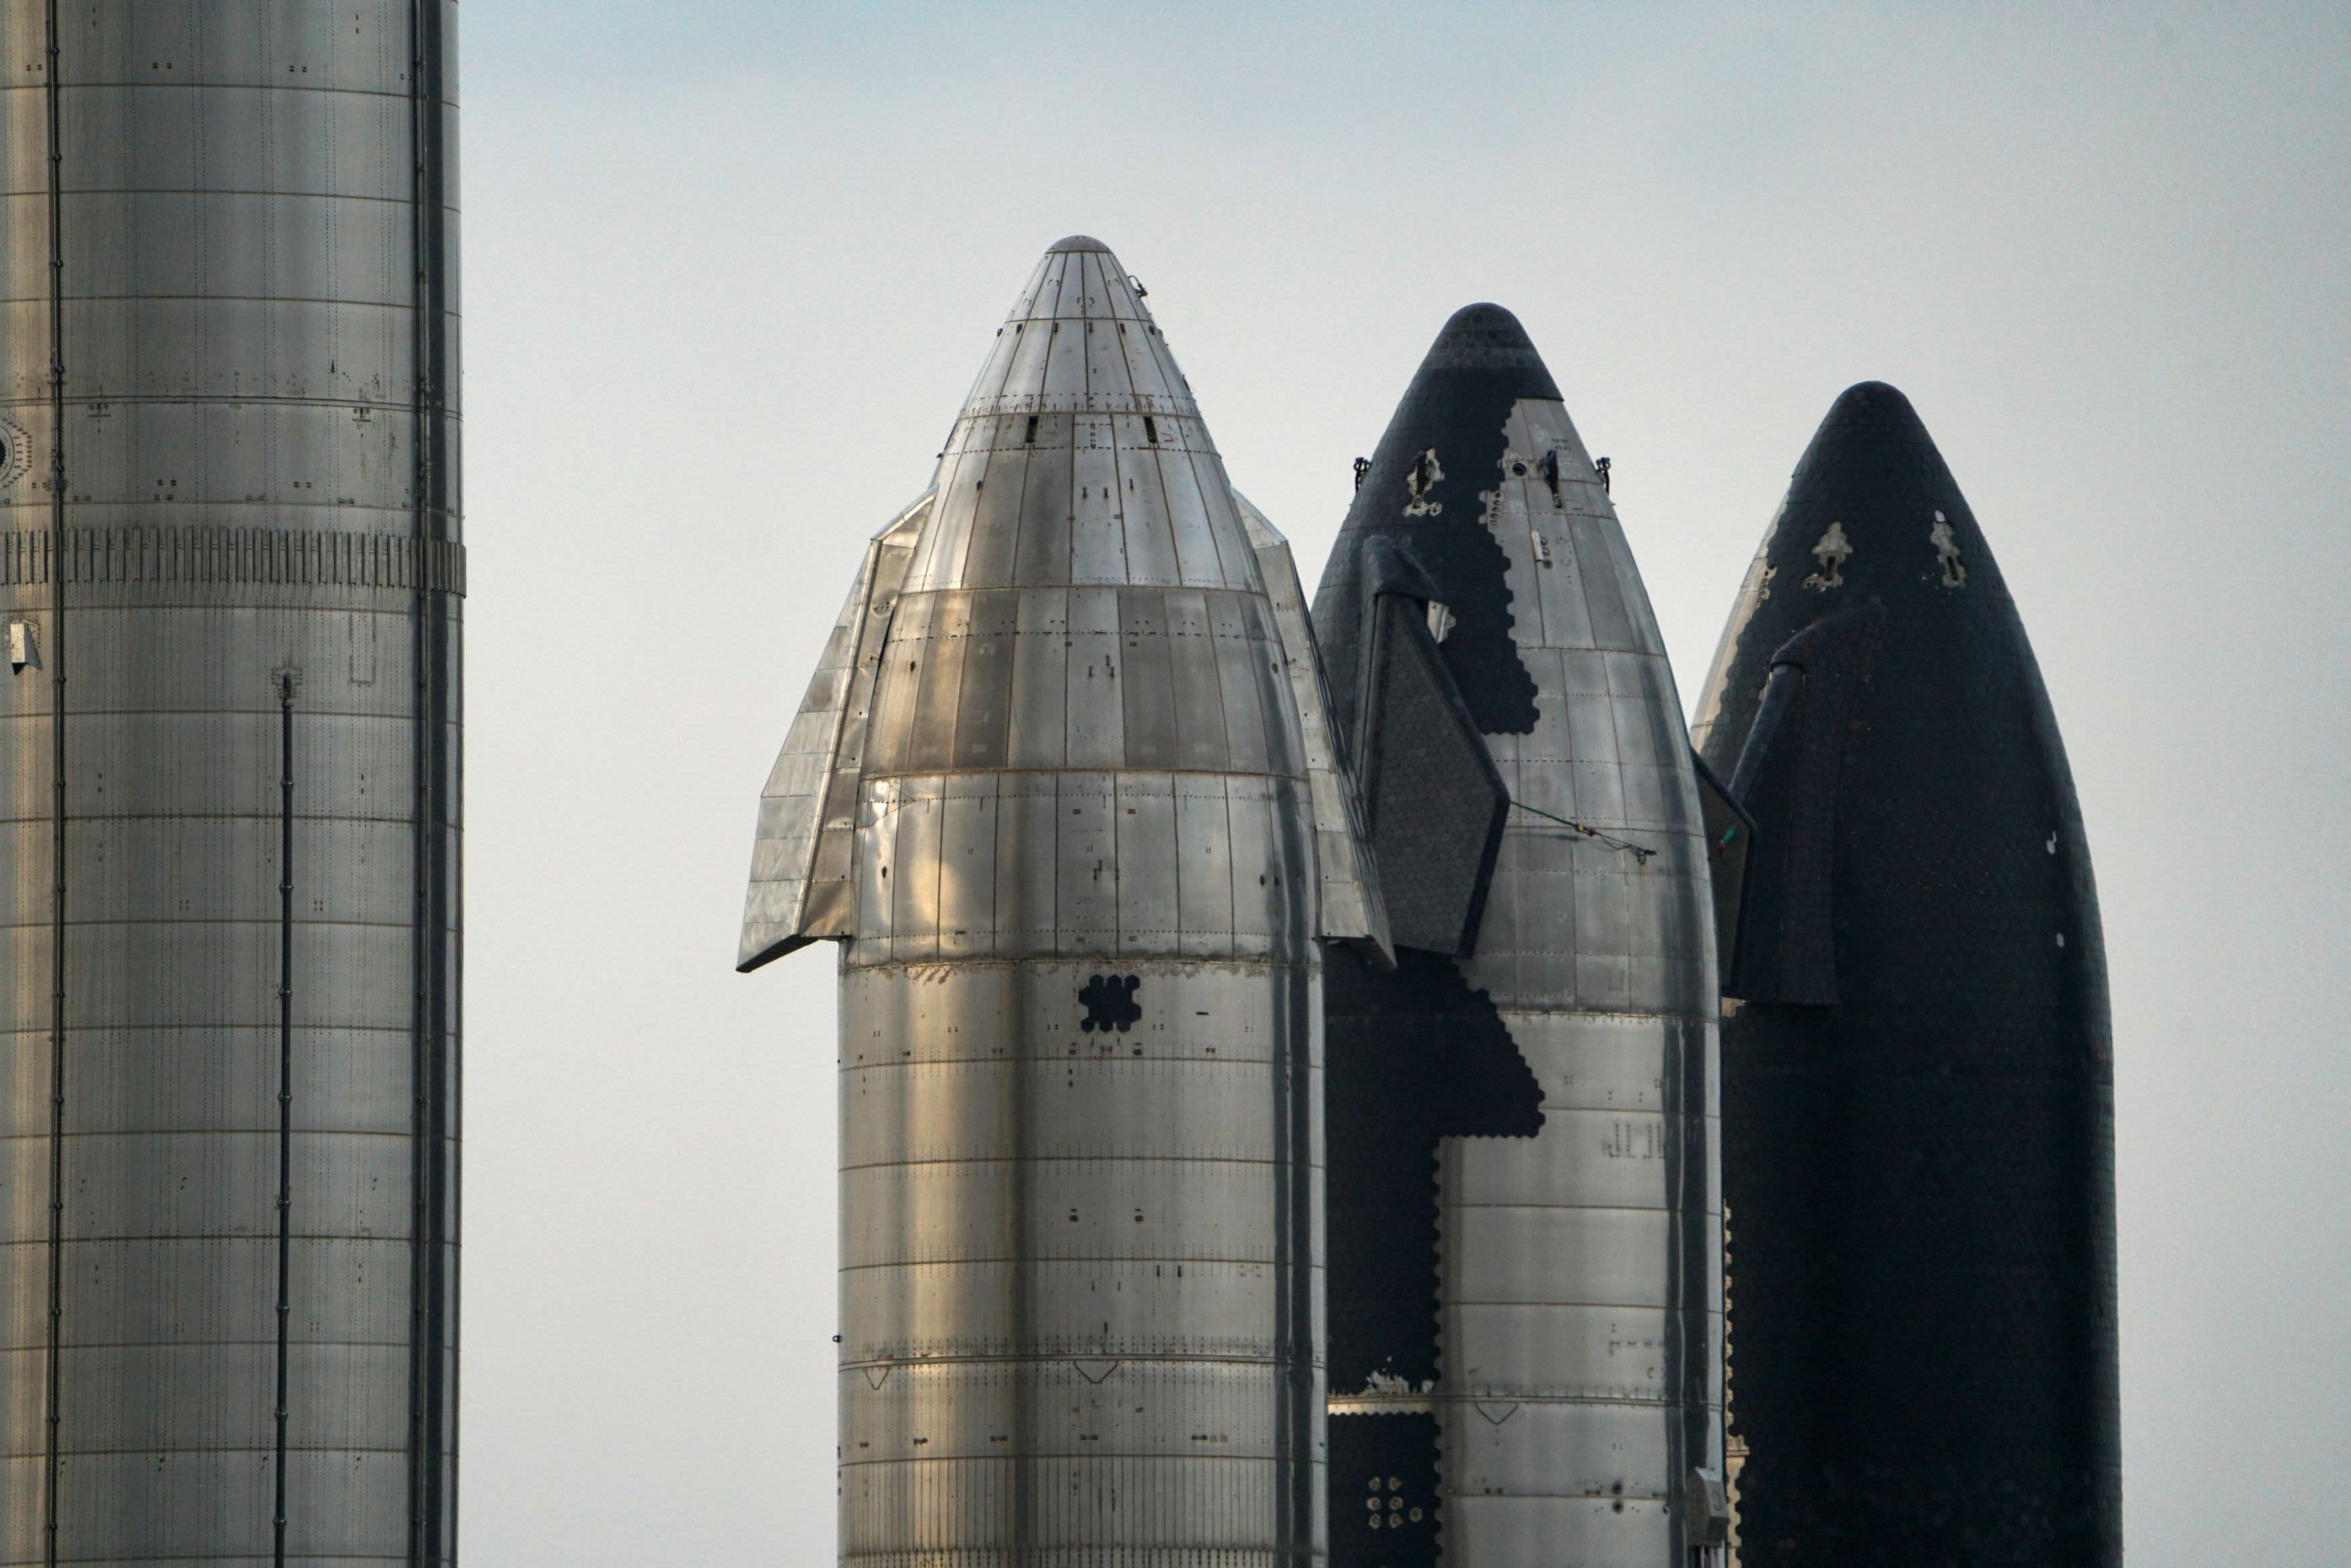 Elon Musk: Starship Ready To Launch, But FAA Requires Corrective Actions